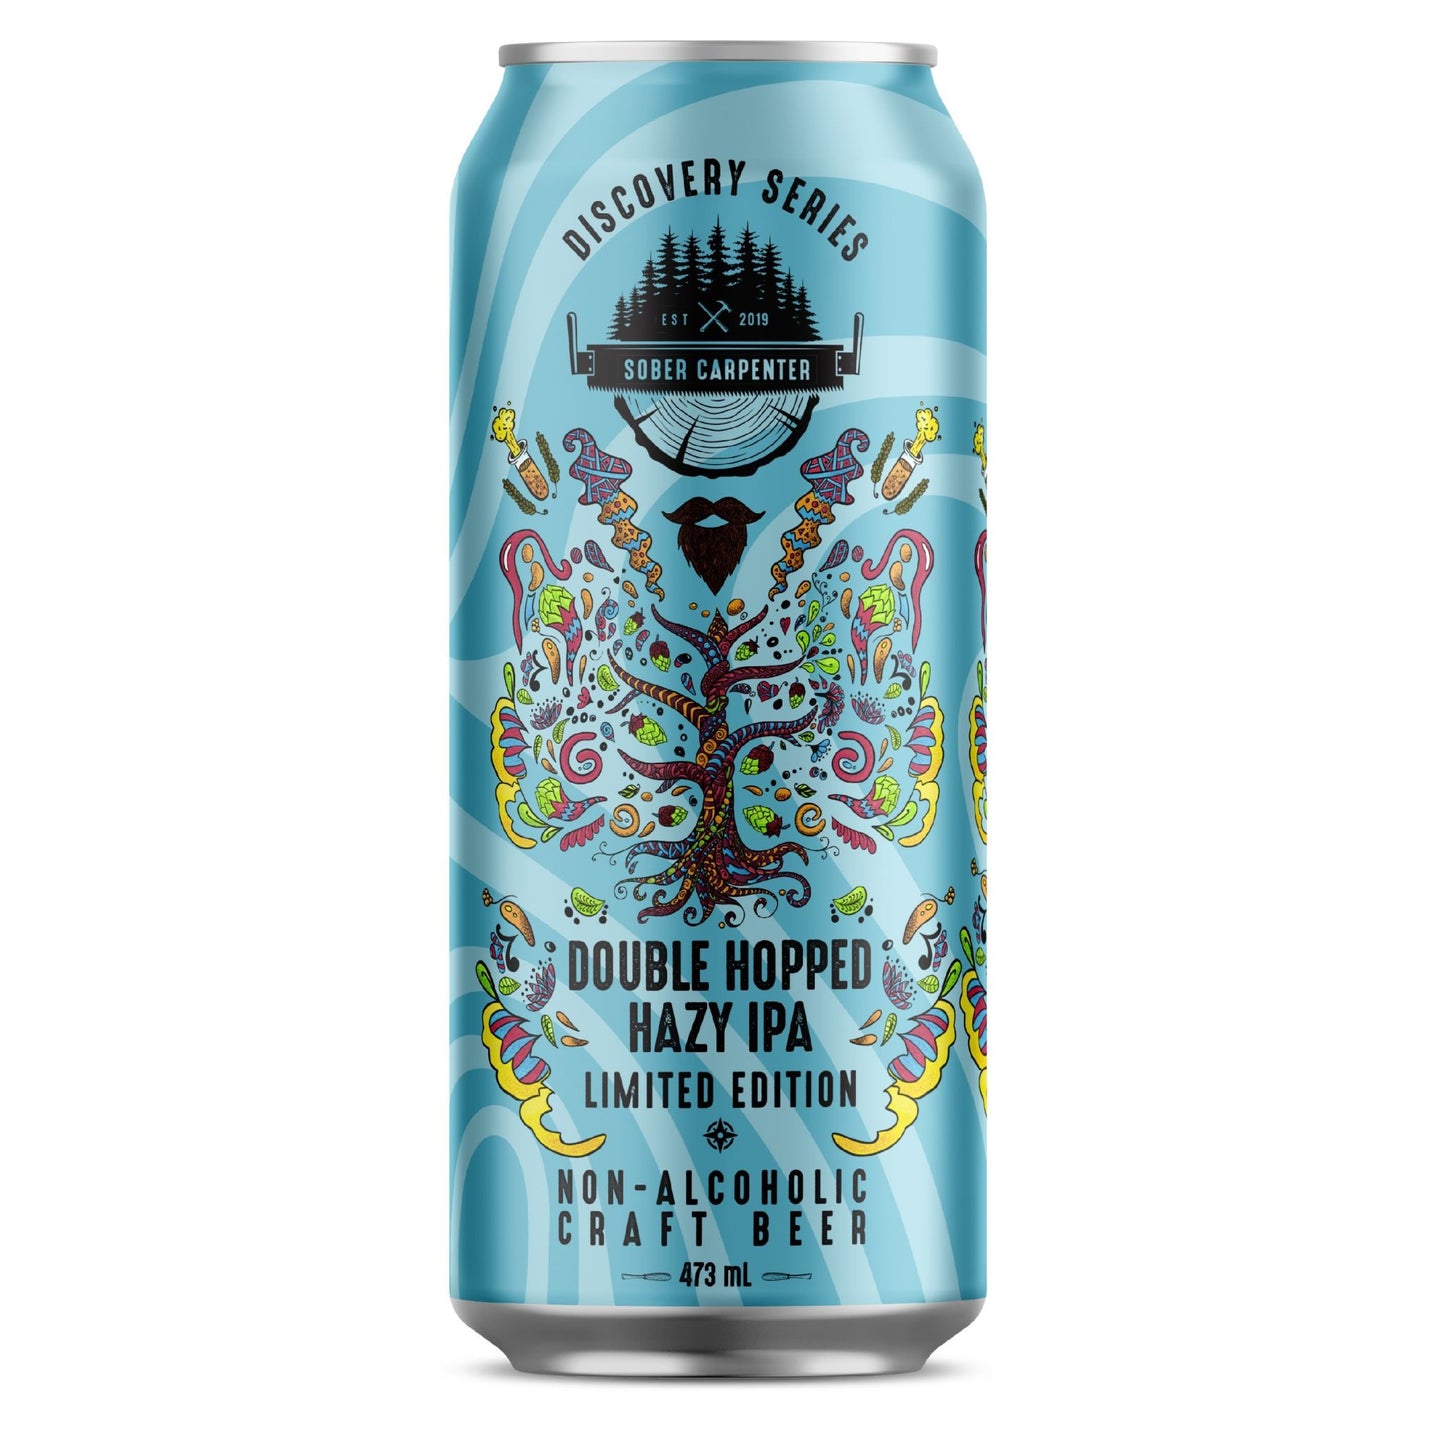 Sober Carpenter Discovery Series Double Hopped Hazy IPA non-alcoholic beer is available for sale at Knyota Drinks in Ottawa.